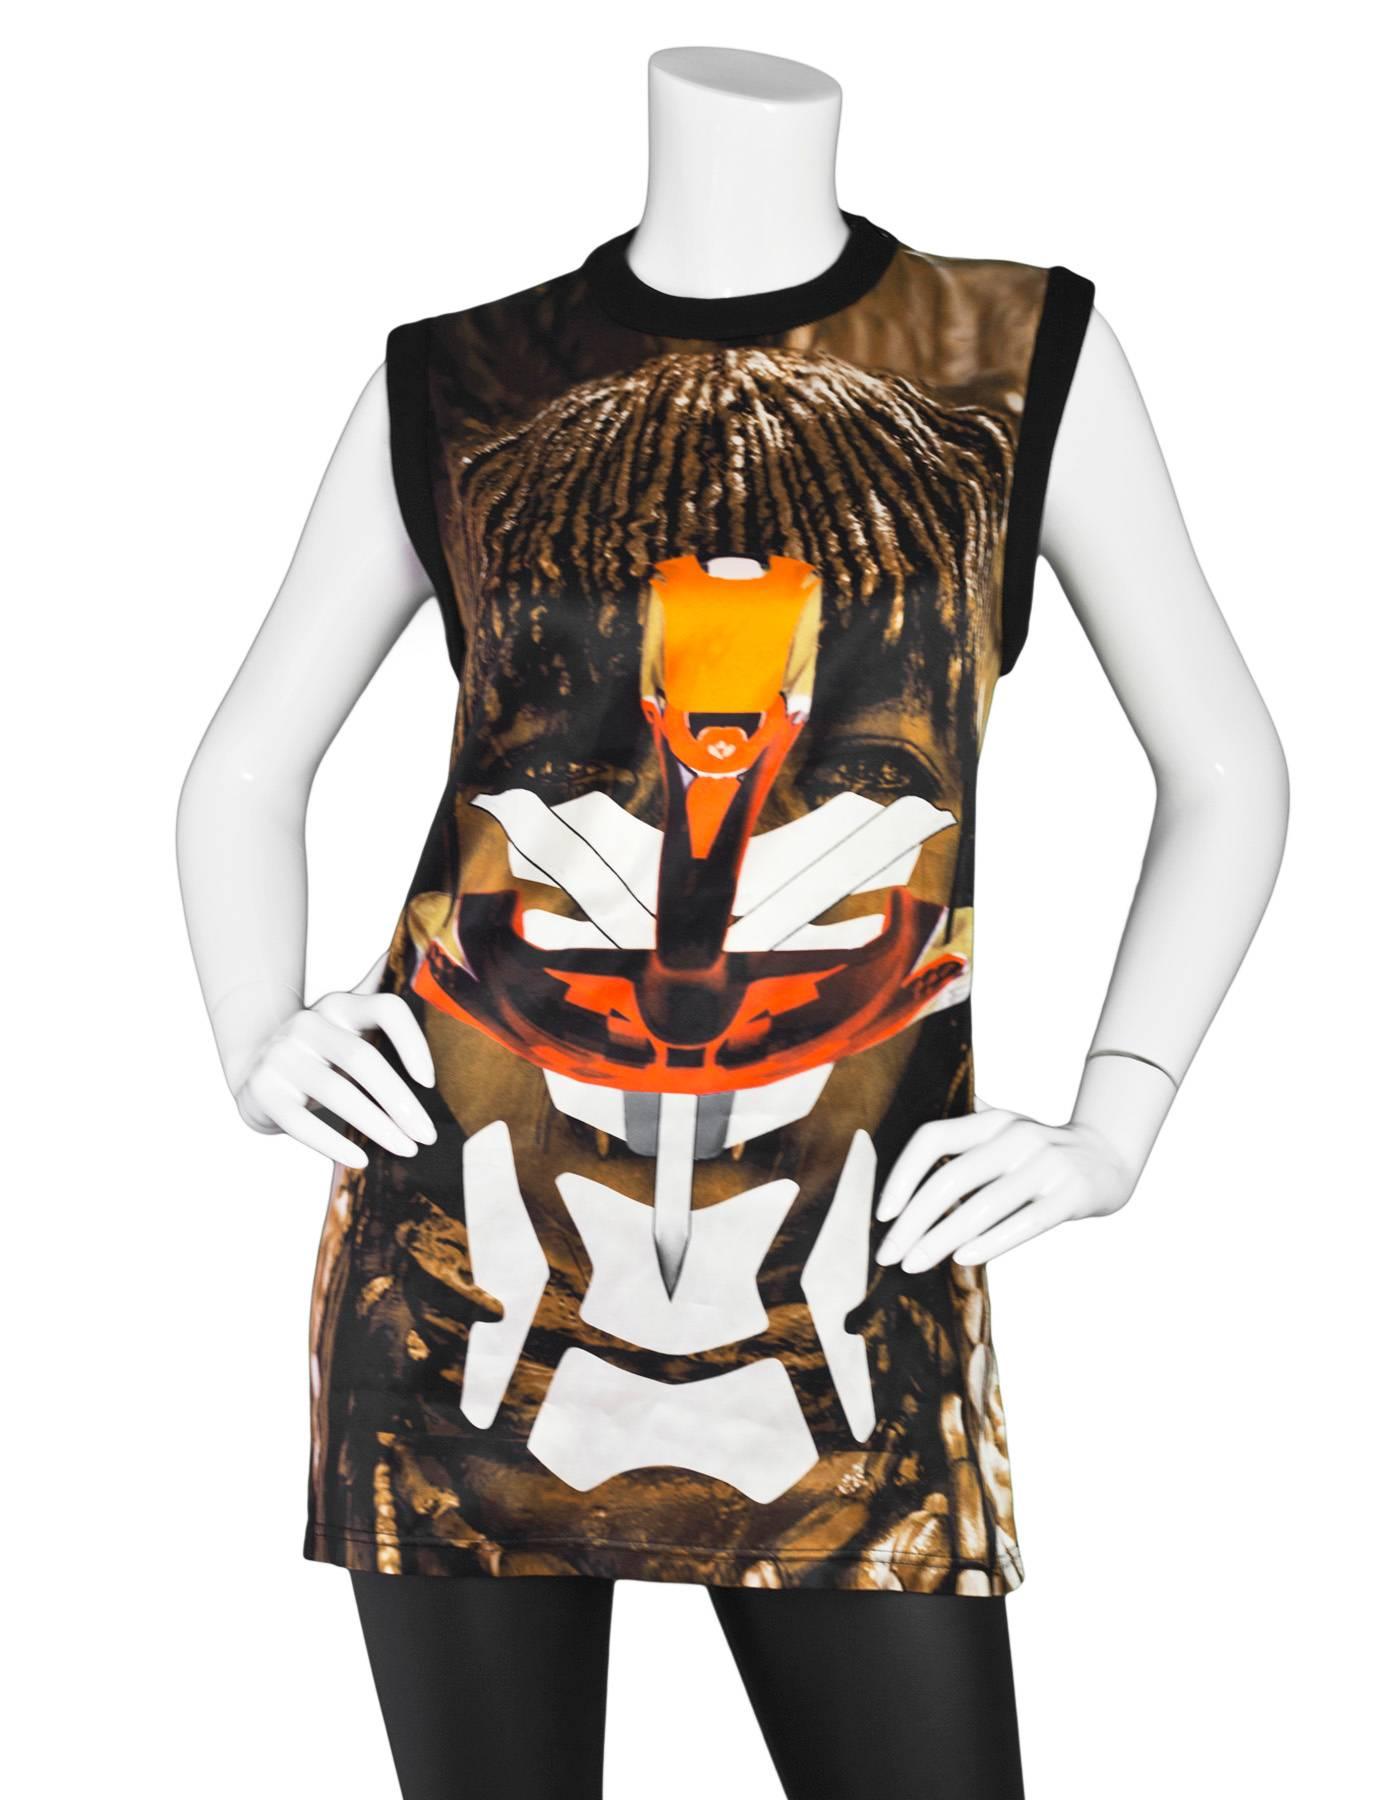 Givenchy SS'14 Tribal & Robot Print Silk Top

Made In: Portugal
Year of Production: 2014
Color: Black, brown, orange and tan
Composition: 100% silk, Trim- 97% cotton, 3% elastane
Lining: None
Closure/Opening: Pull over with shoulder neckline